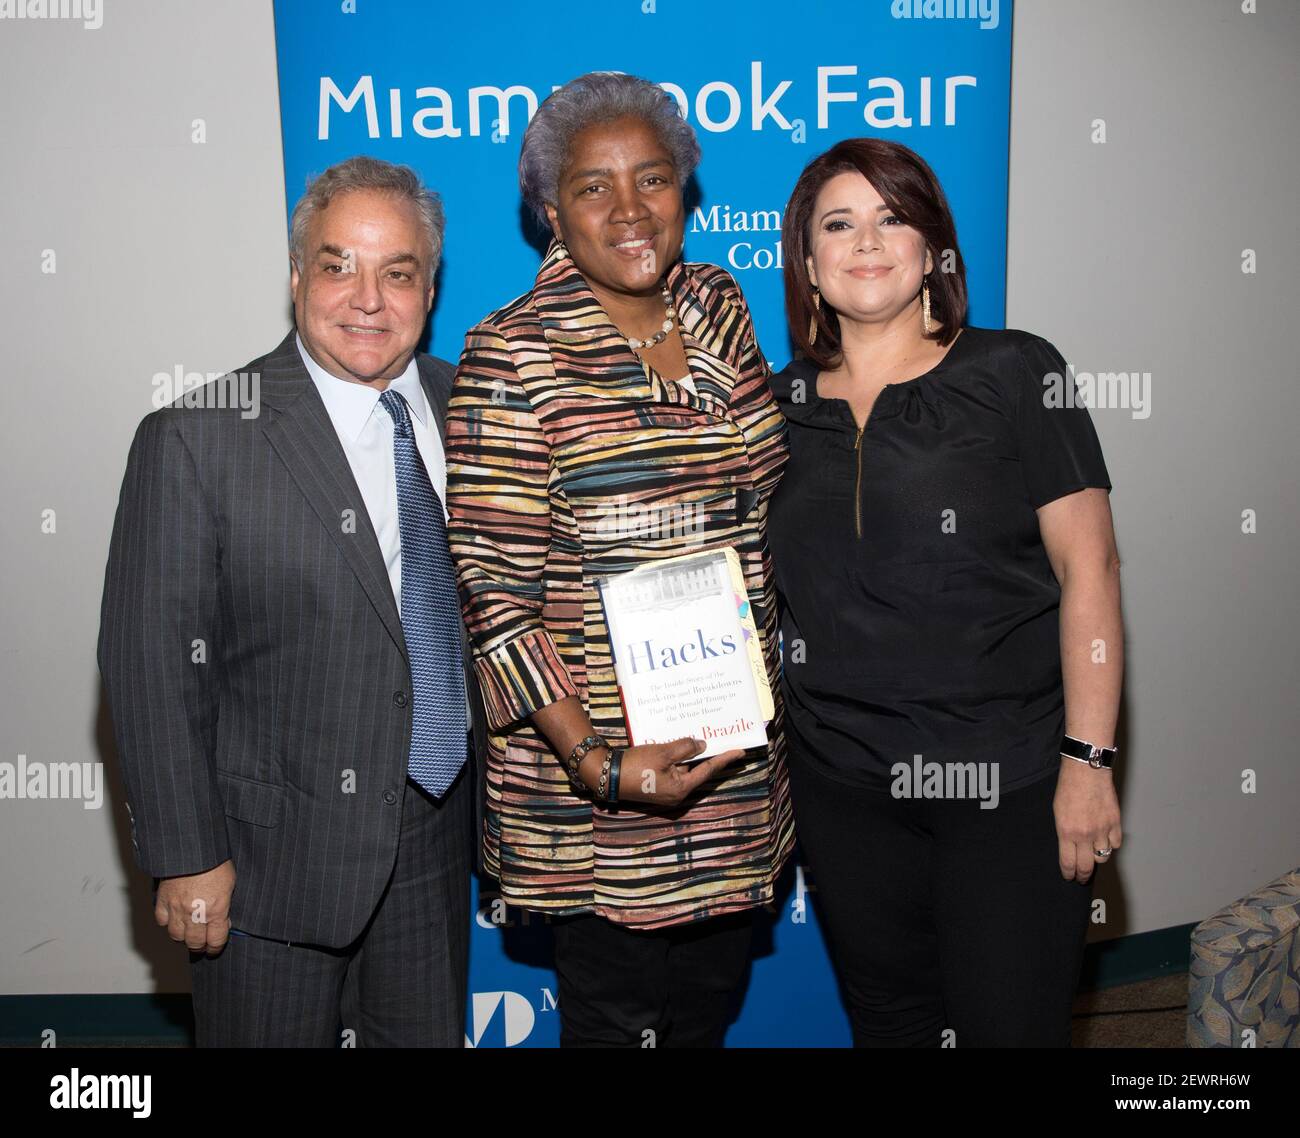 MIAMI, FL - NOVEMBER 15: Lee Schrager, Donna Brazile and Ana Navarro are  seen backstage during An Evening With Donna Brazile in conversation with  Ana Navarro on the fourth day of The